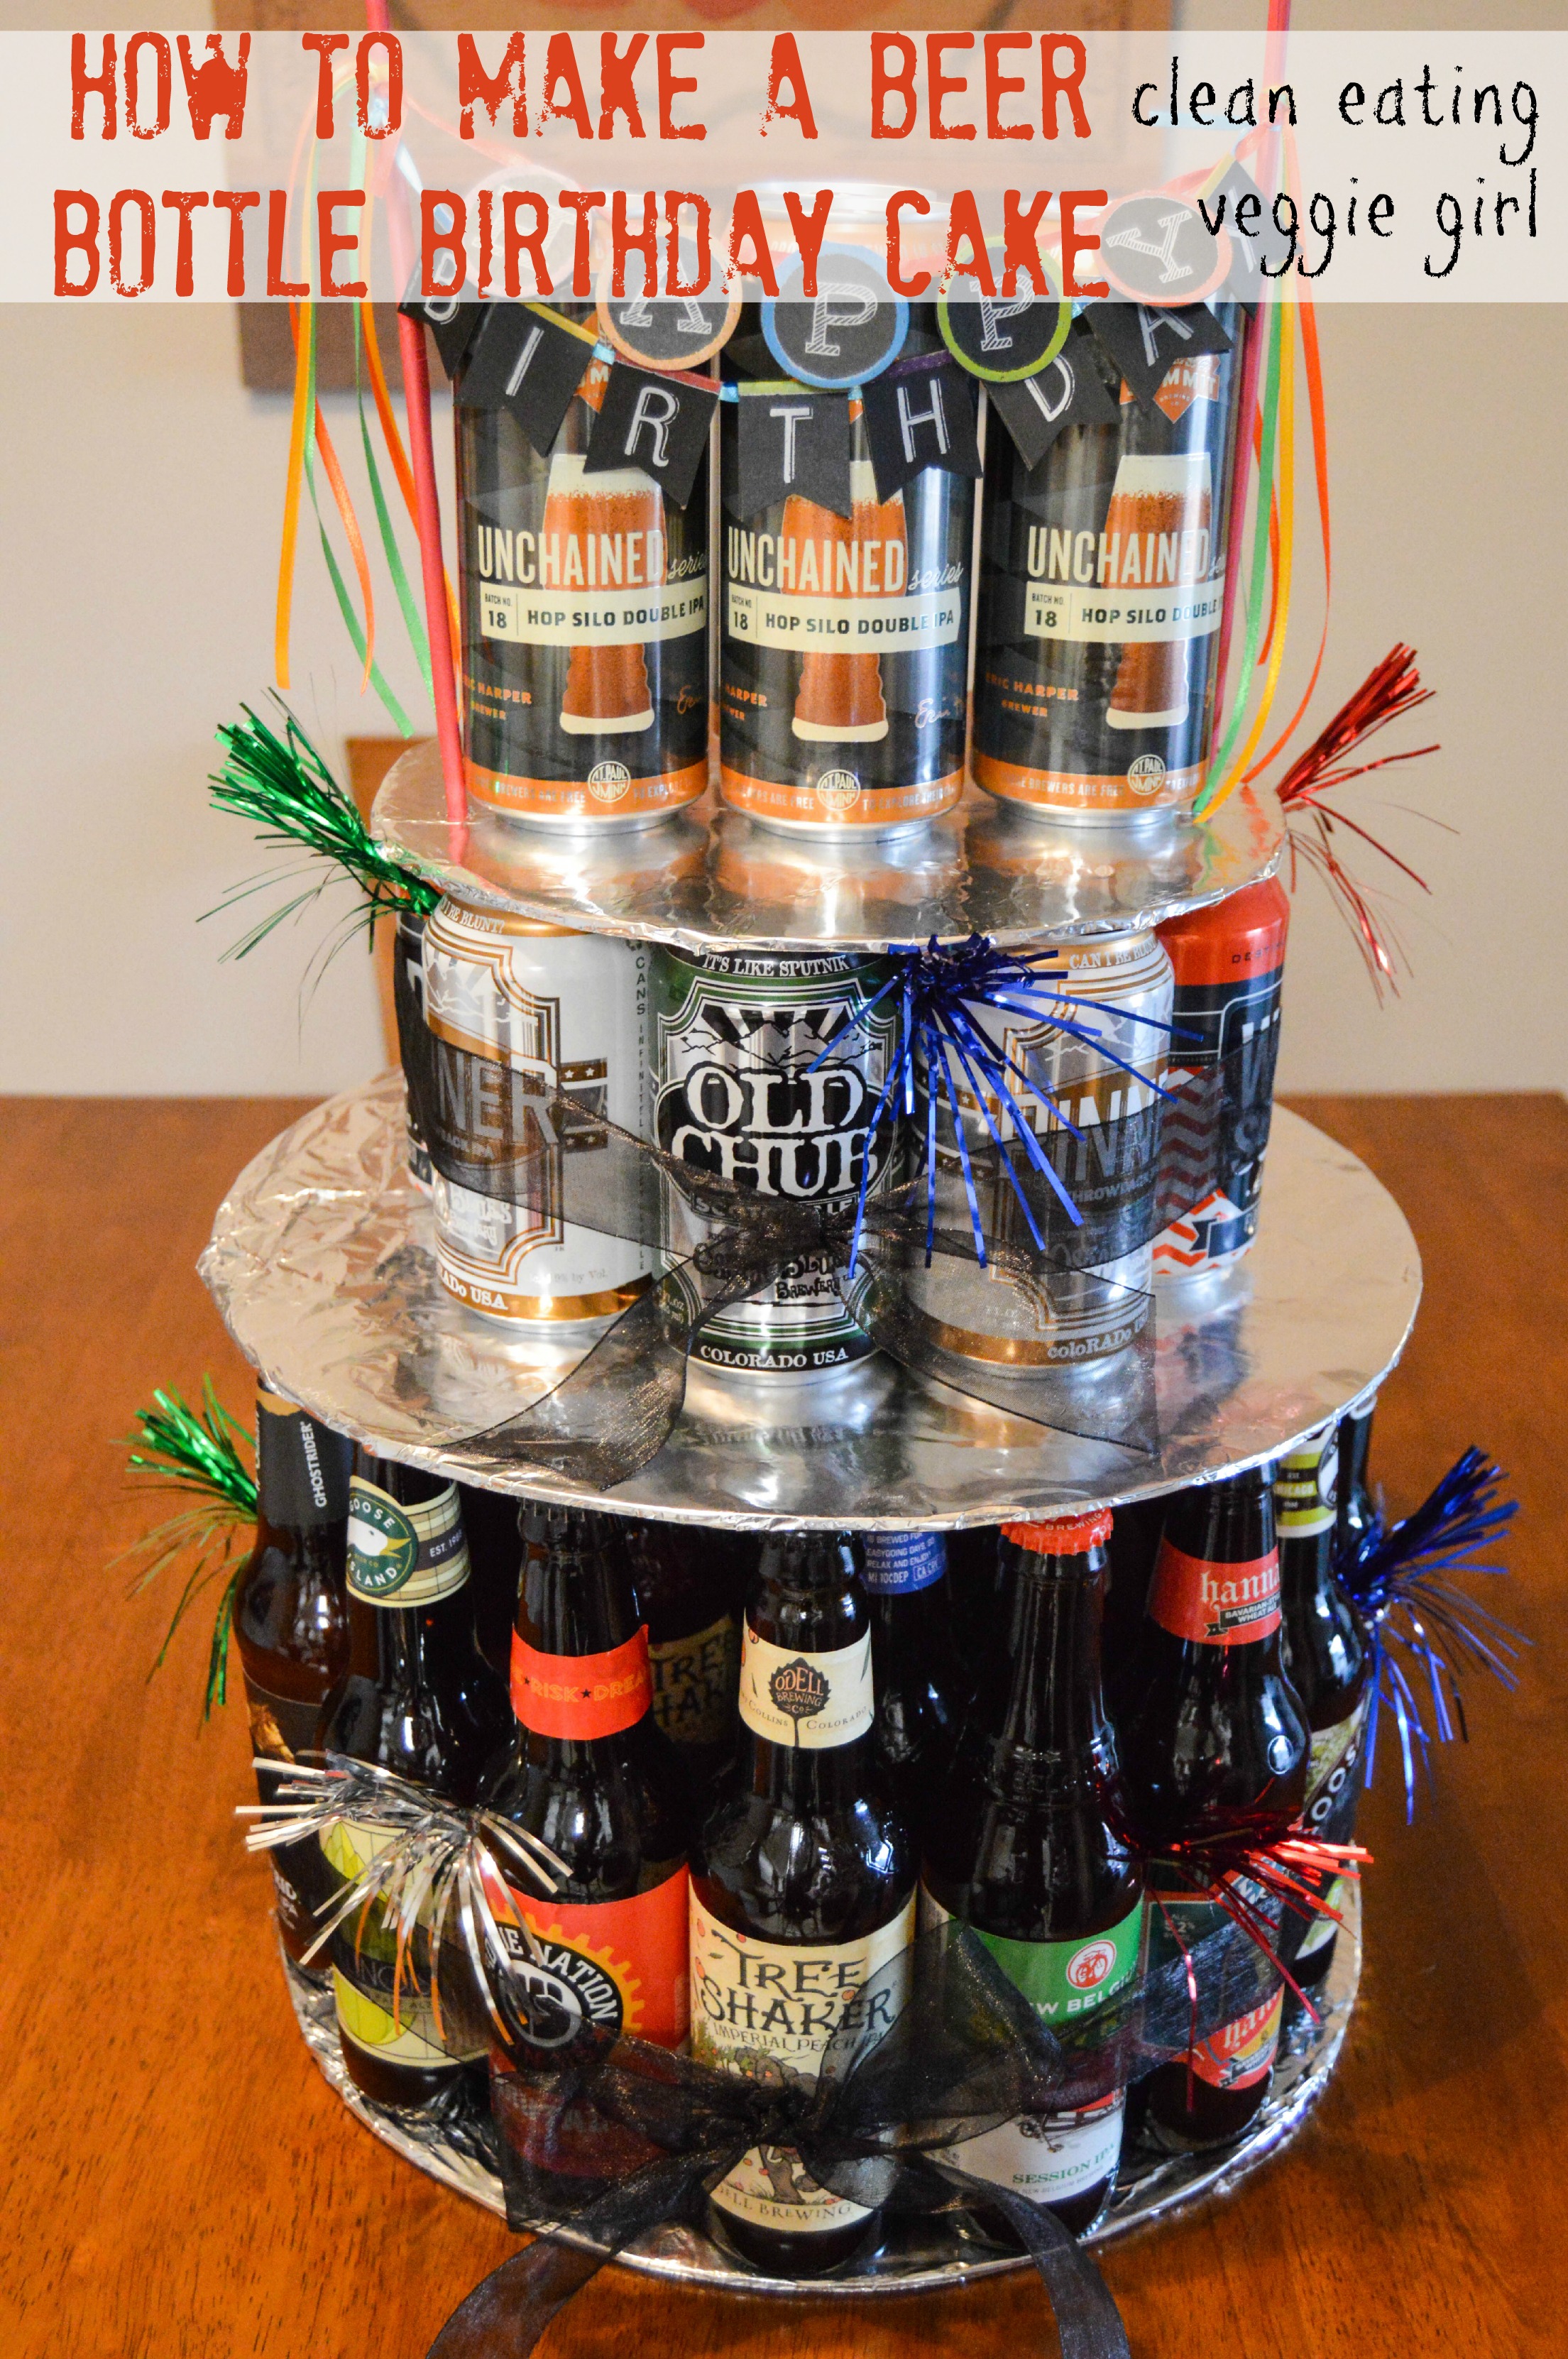 How To Make Birthday Cake With Beer Bottles | topqa.info